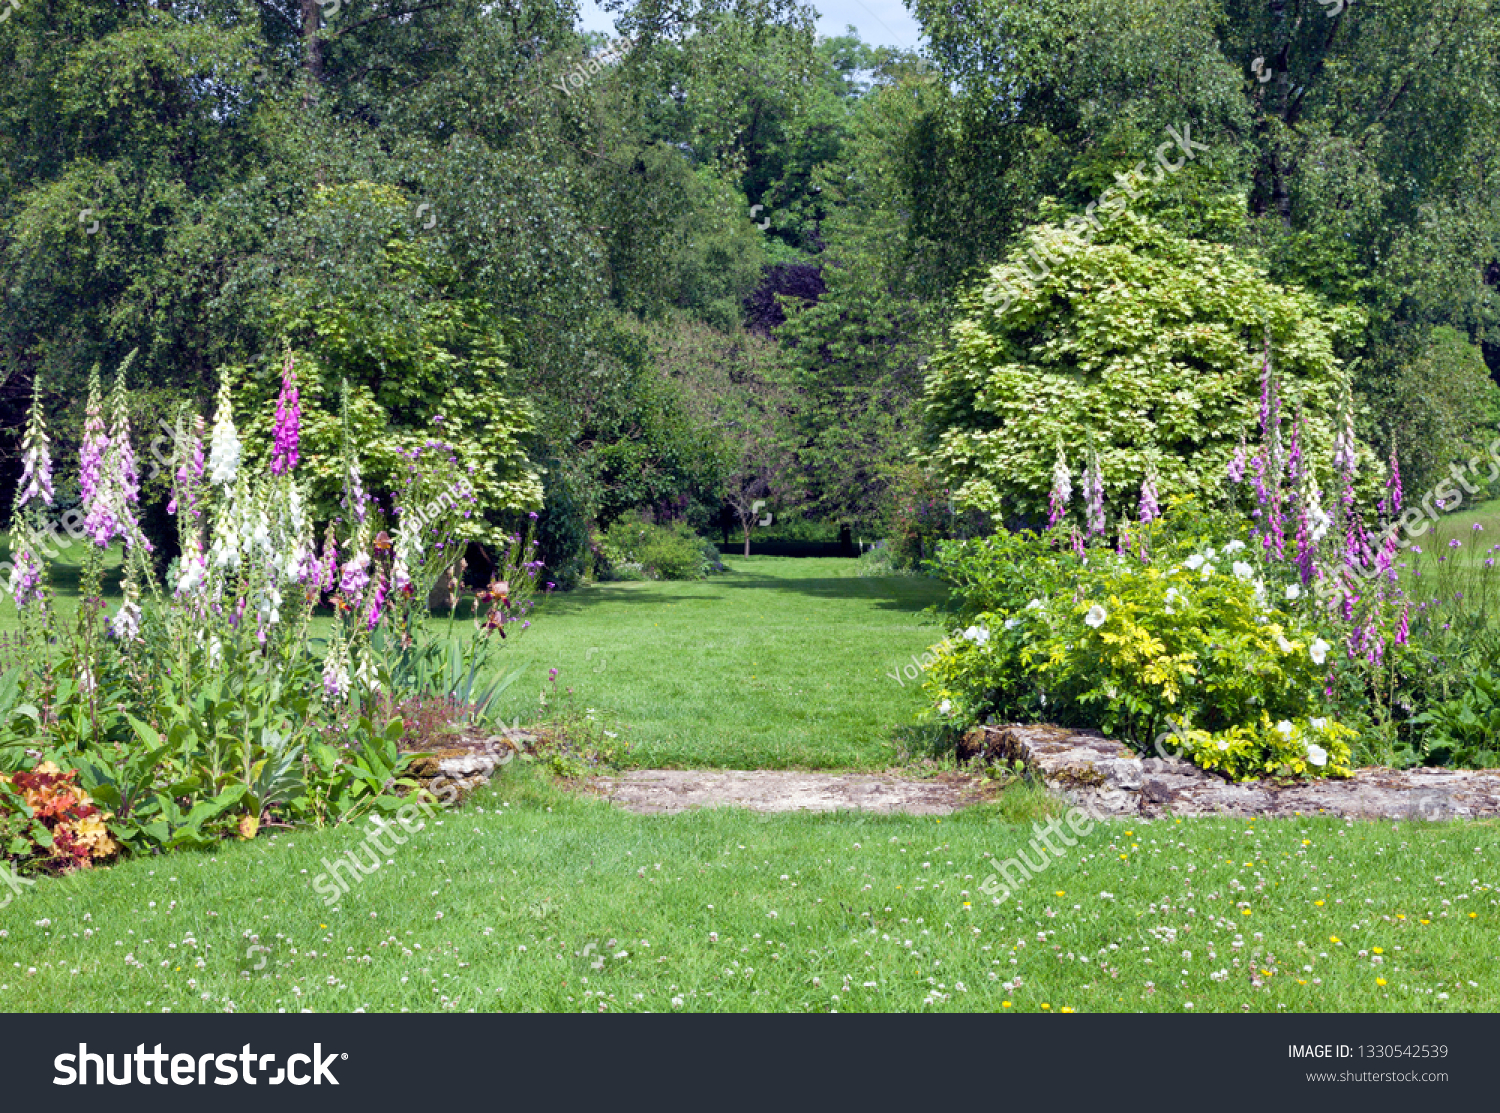 Colourful foxglove flowers, white roses, shrubs and leafy trees along a grass walking path in a charming garden in an English countryside . #1330542539